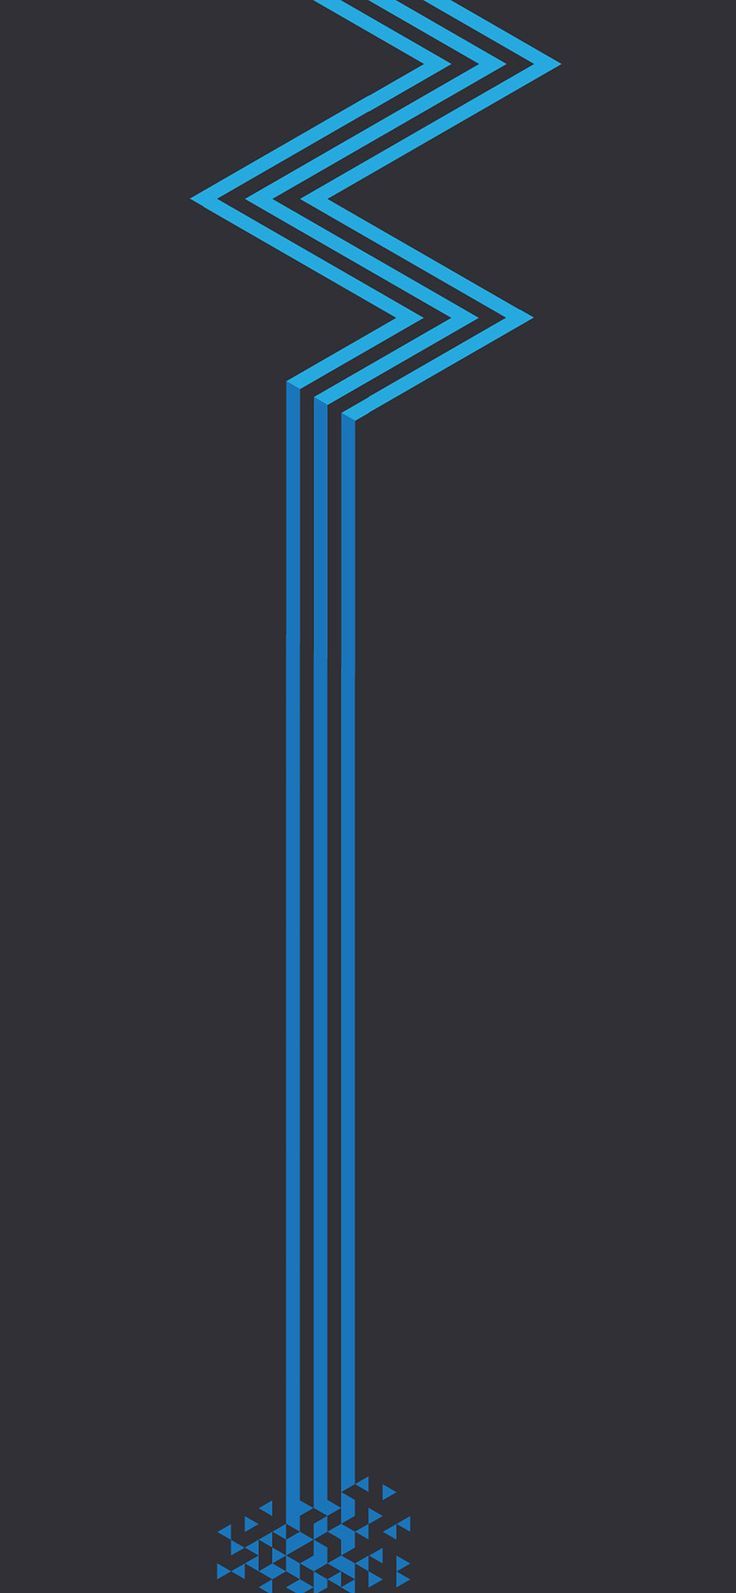 iPhone X wallpaper, minimal blue dark line abstract digital pattern background via iPhoneXpaper. Wallpaper Magazine Your daily source of best wallpaper around the world